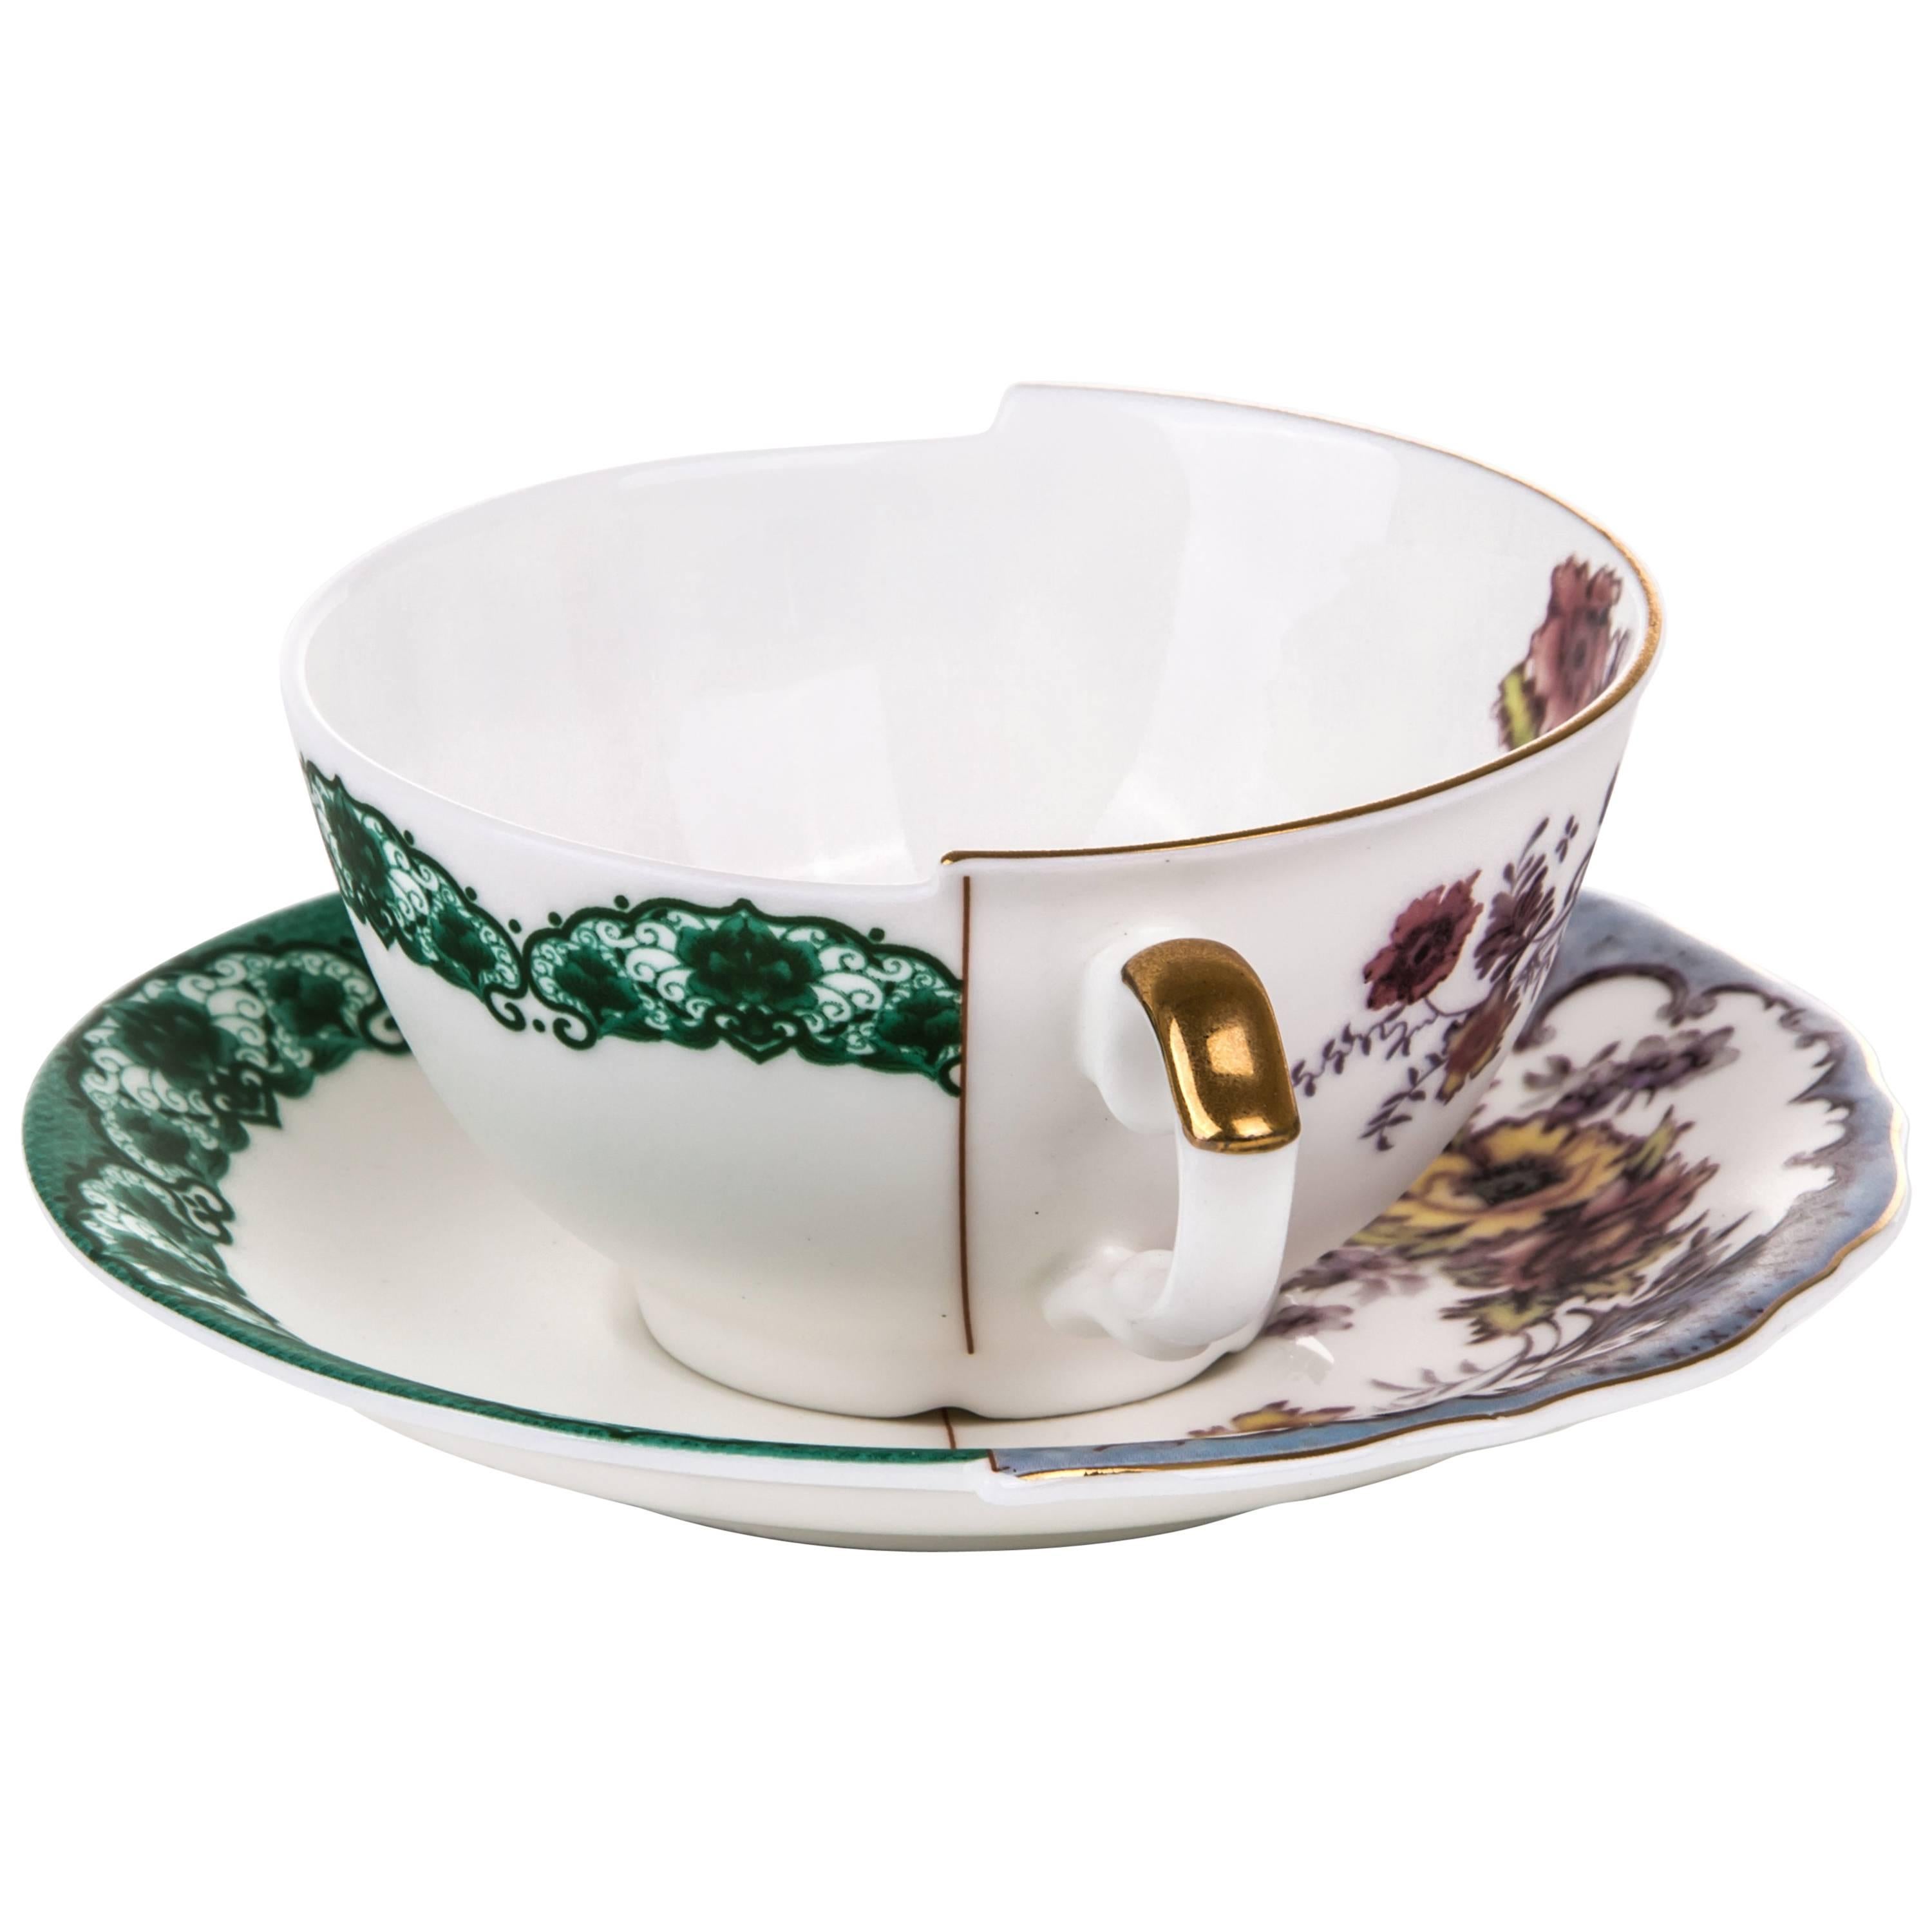 Seletti "Hybrid-Isidora" Teacup with Saucer in Porcelain